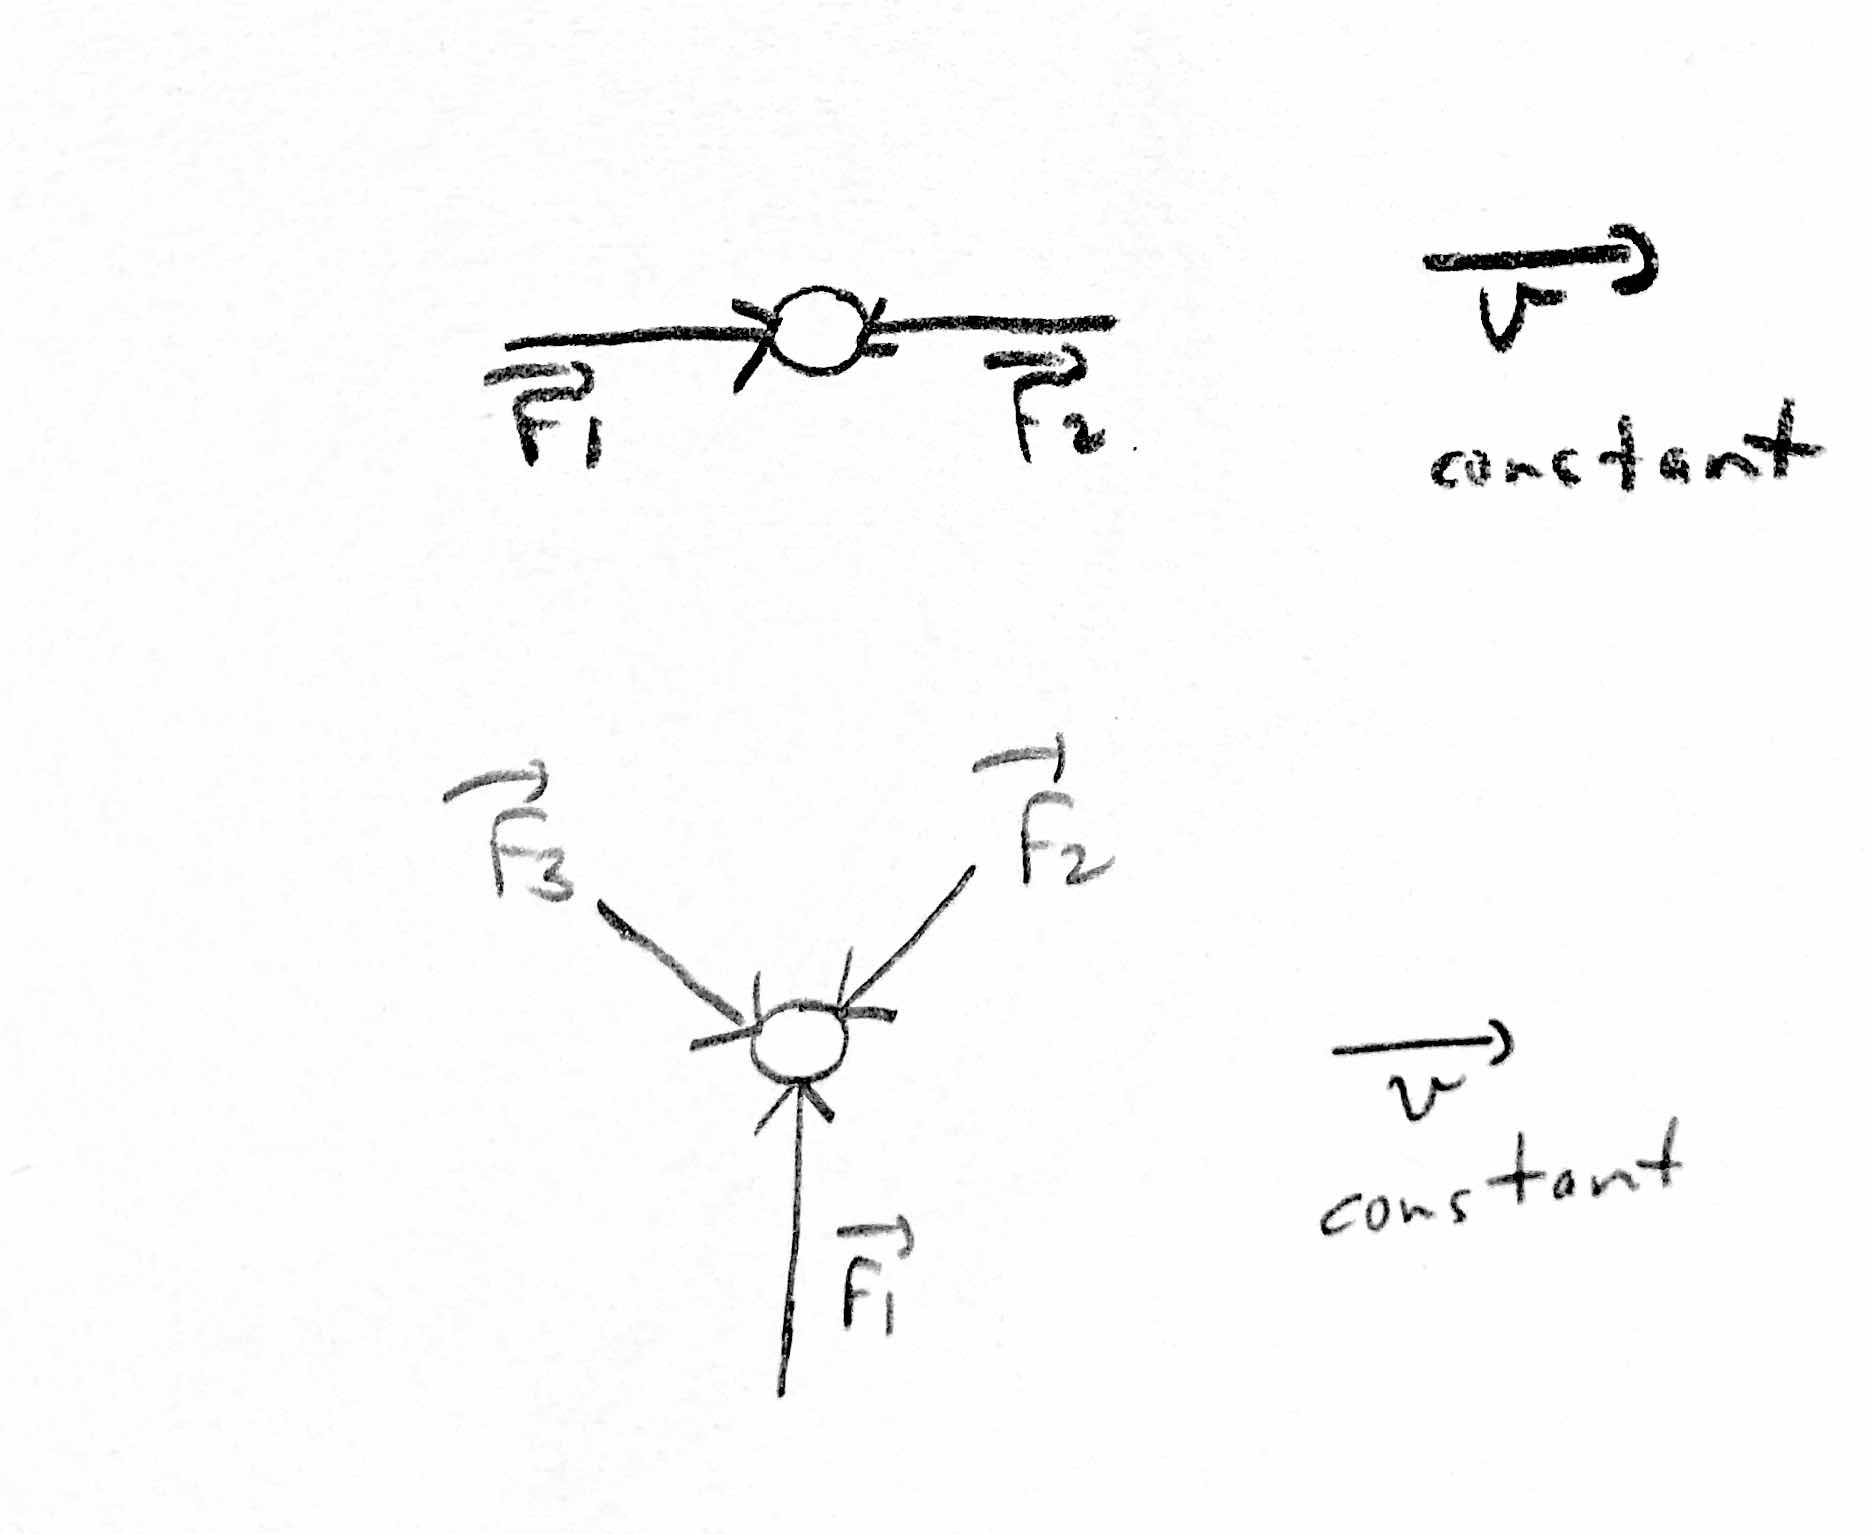 first picture shows two arrows of same size but opposite direction acting on a single body, the second one shows three vectors acting on a point one up and the other two down at 45 degrees.